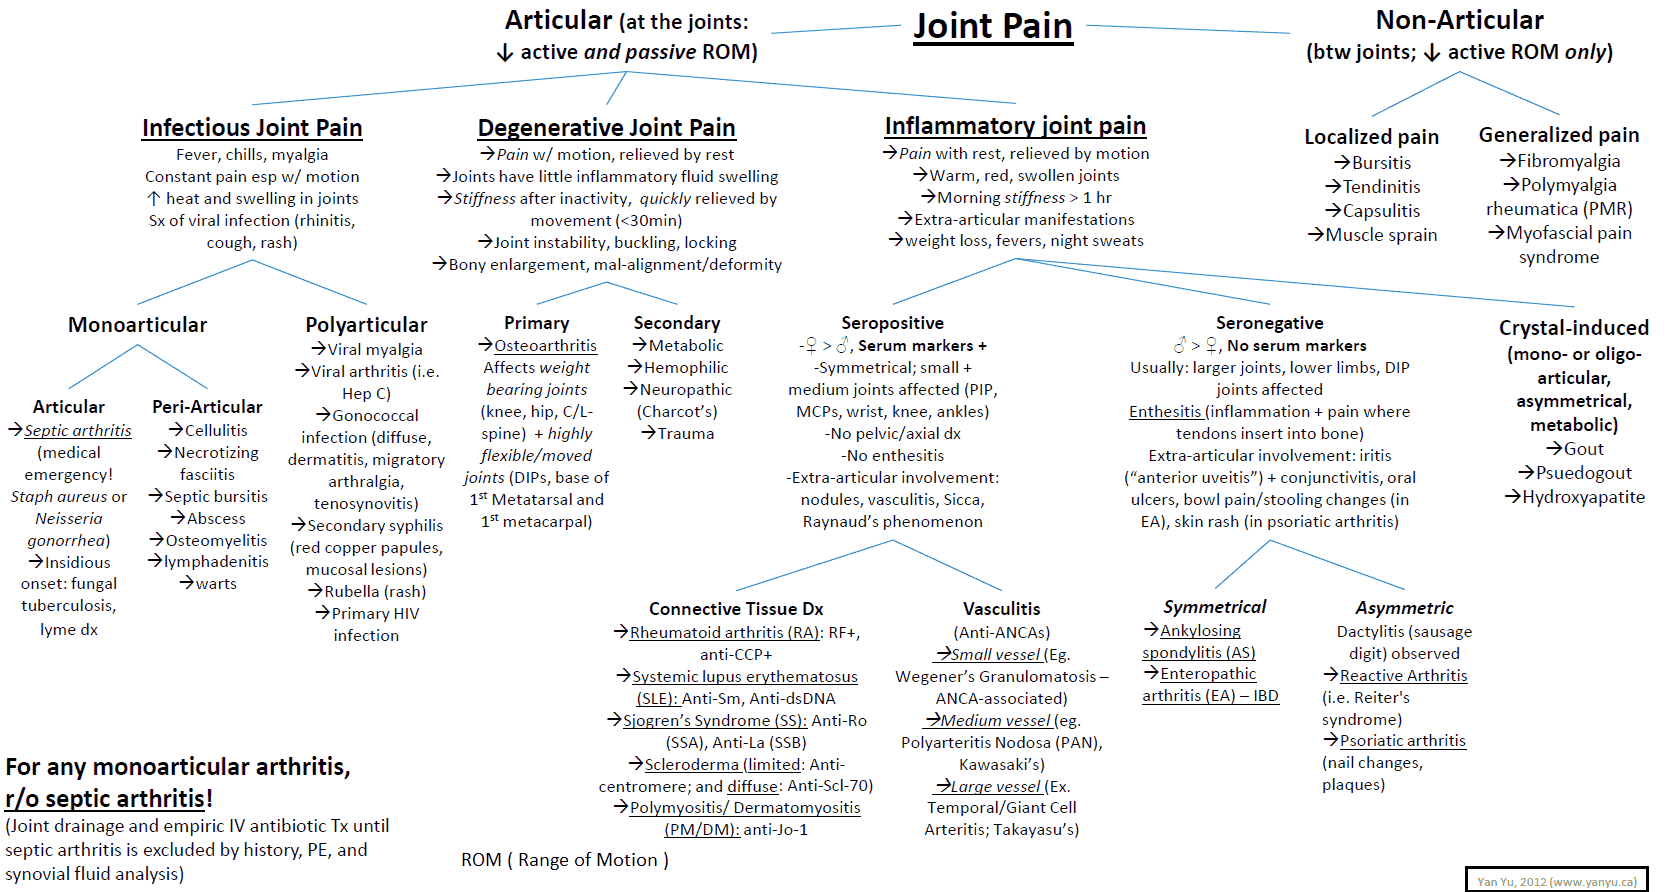 Joint Pain - Differential Diagnosis